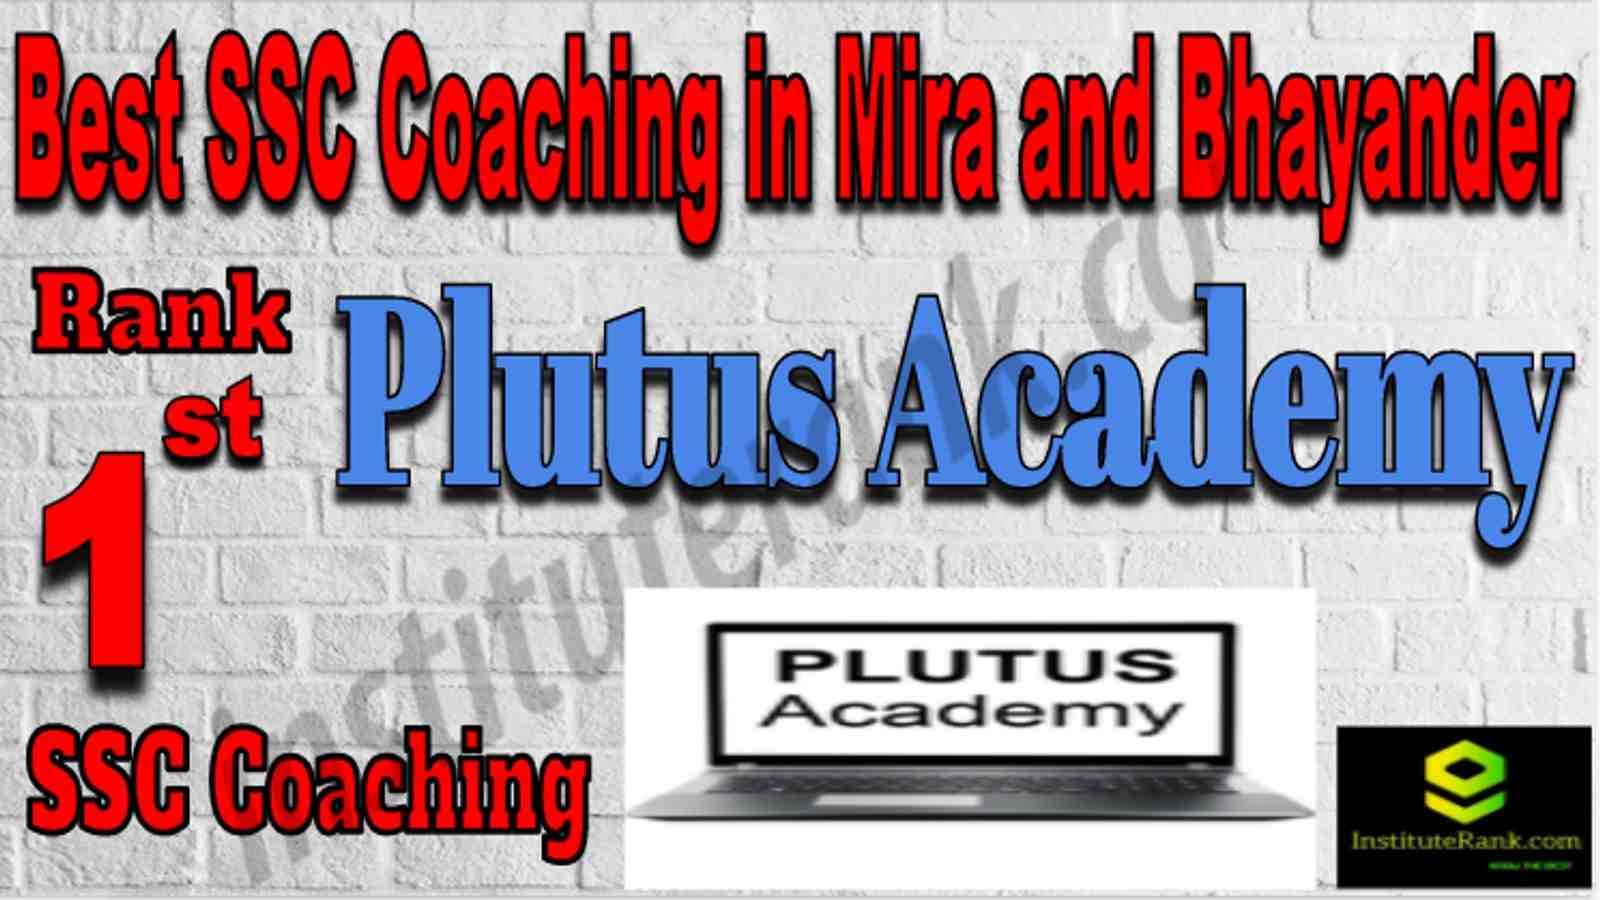 Rank 1 Best SSC Coaching in Mira and Bhayander